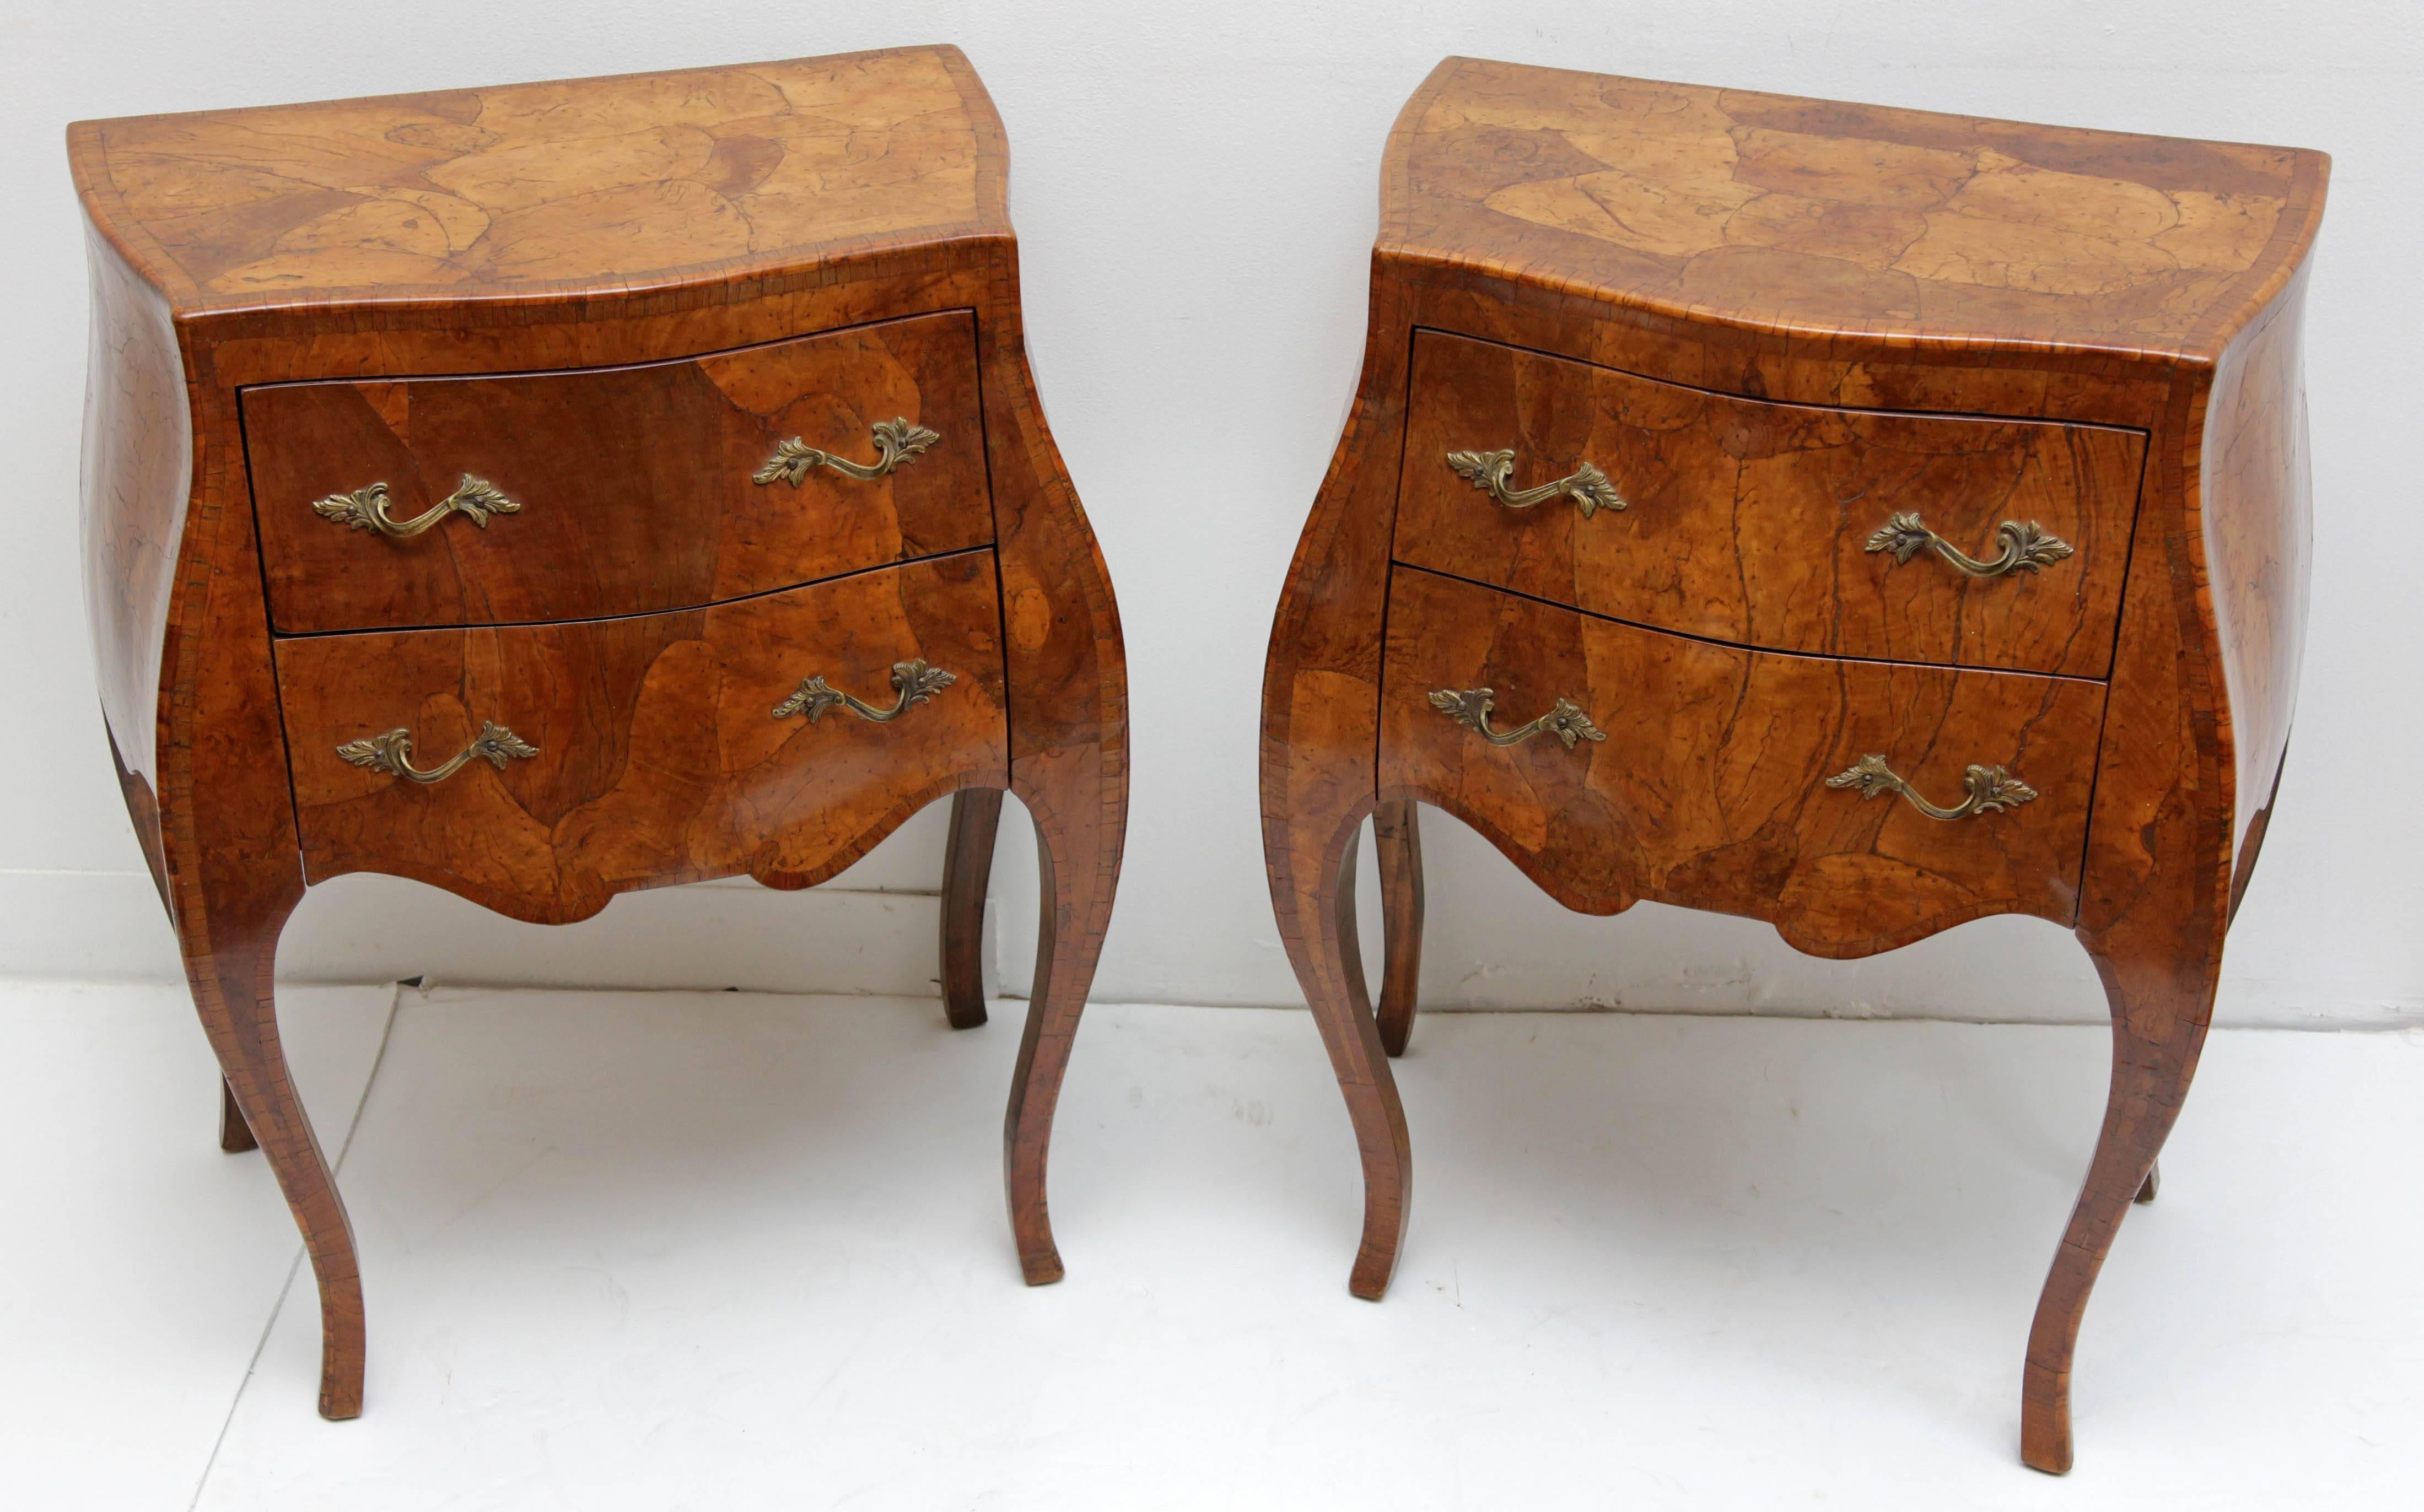 Pair of Provencal Italian bombe side or end tables. Richly veneered in in figured walnut, circa 1940s.